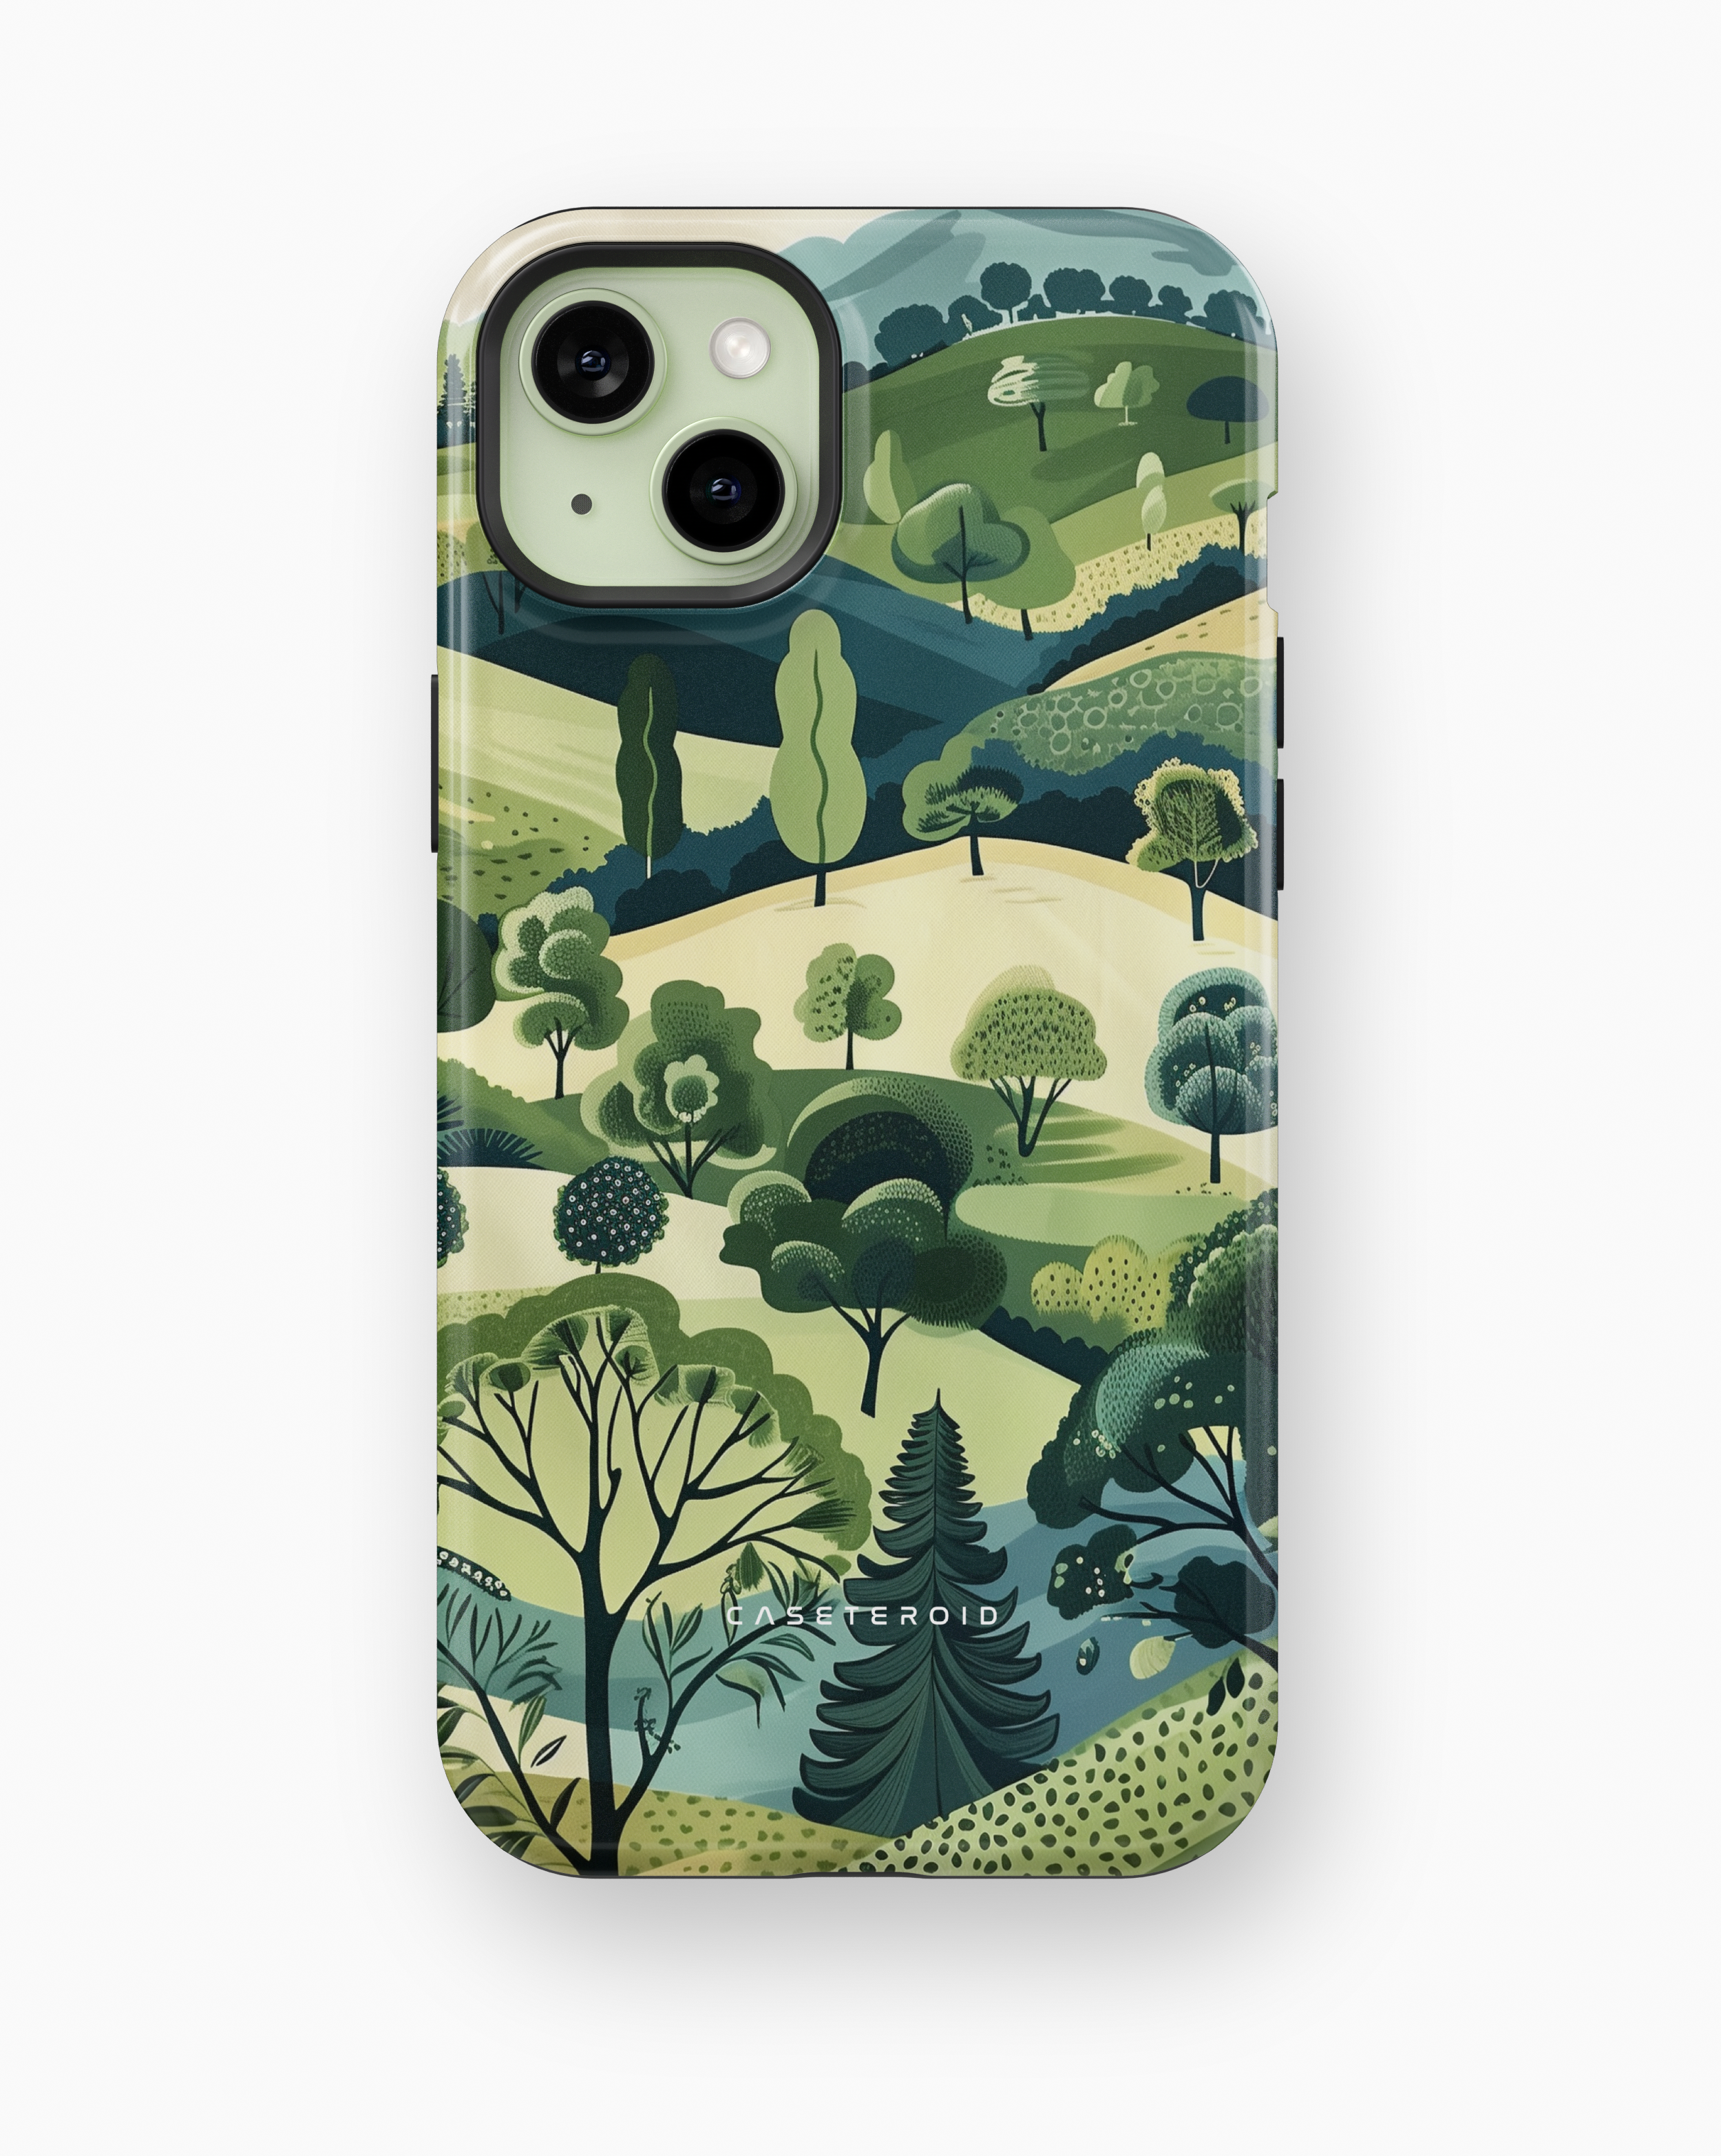 iPhone Tough Case - Tranquil Terrain Tapestry - CASETEROID